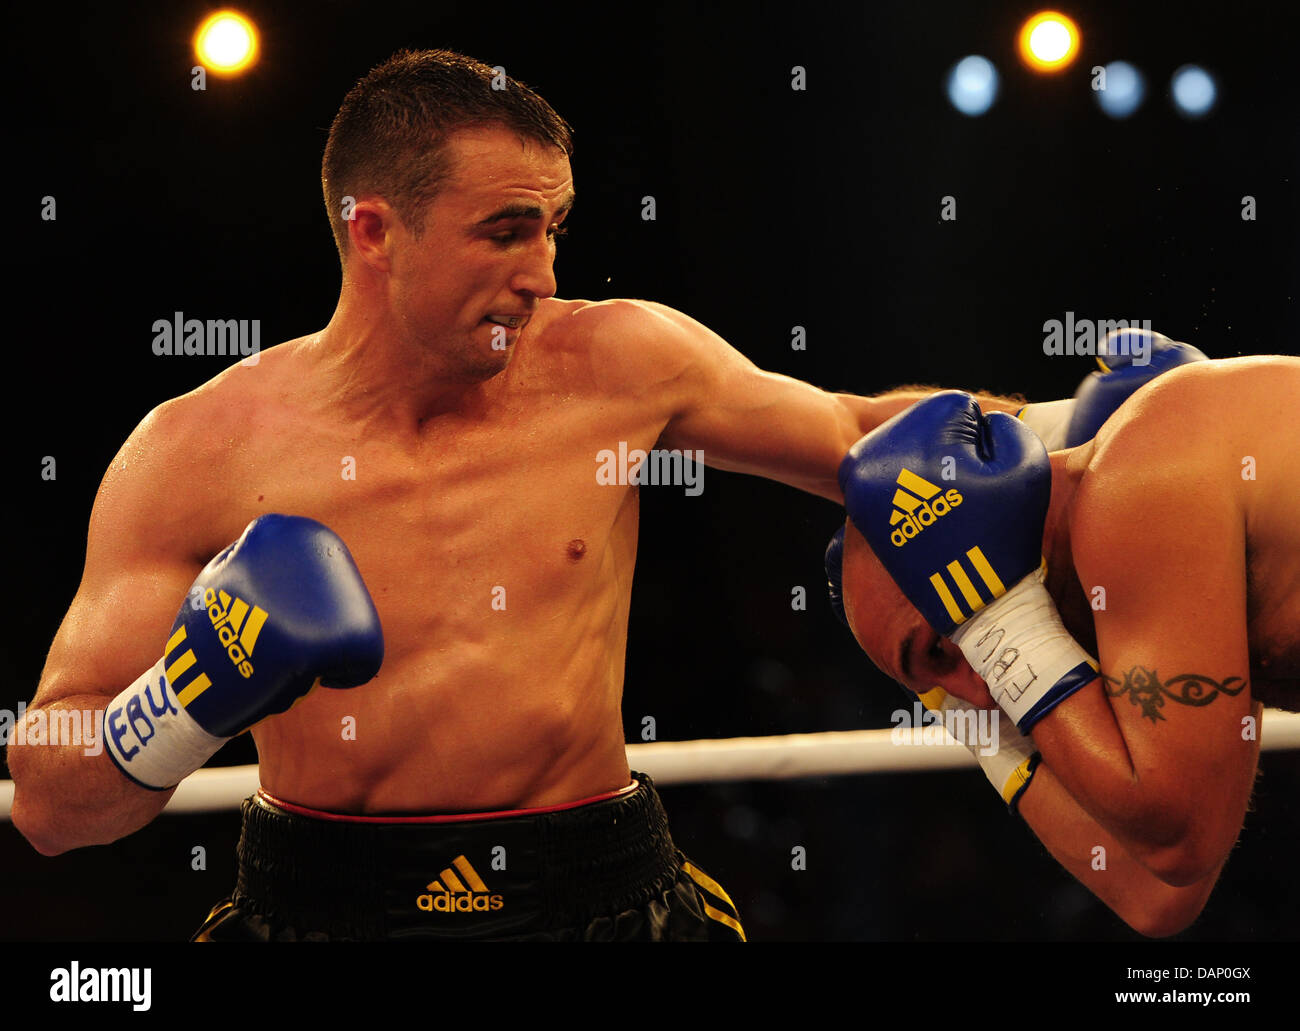 Cruiser weight boxers Eduard Gutknecht (L) from Germany and Italian Stock  Photo - Alamy